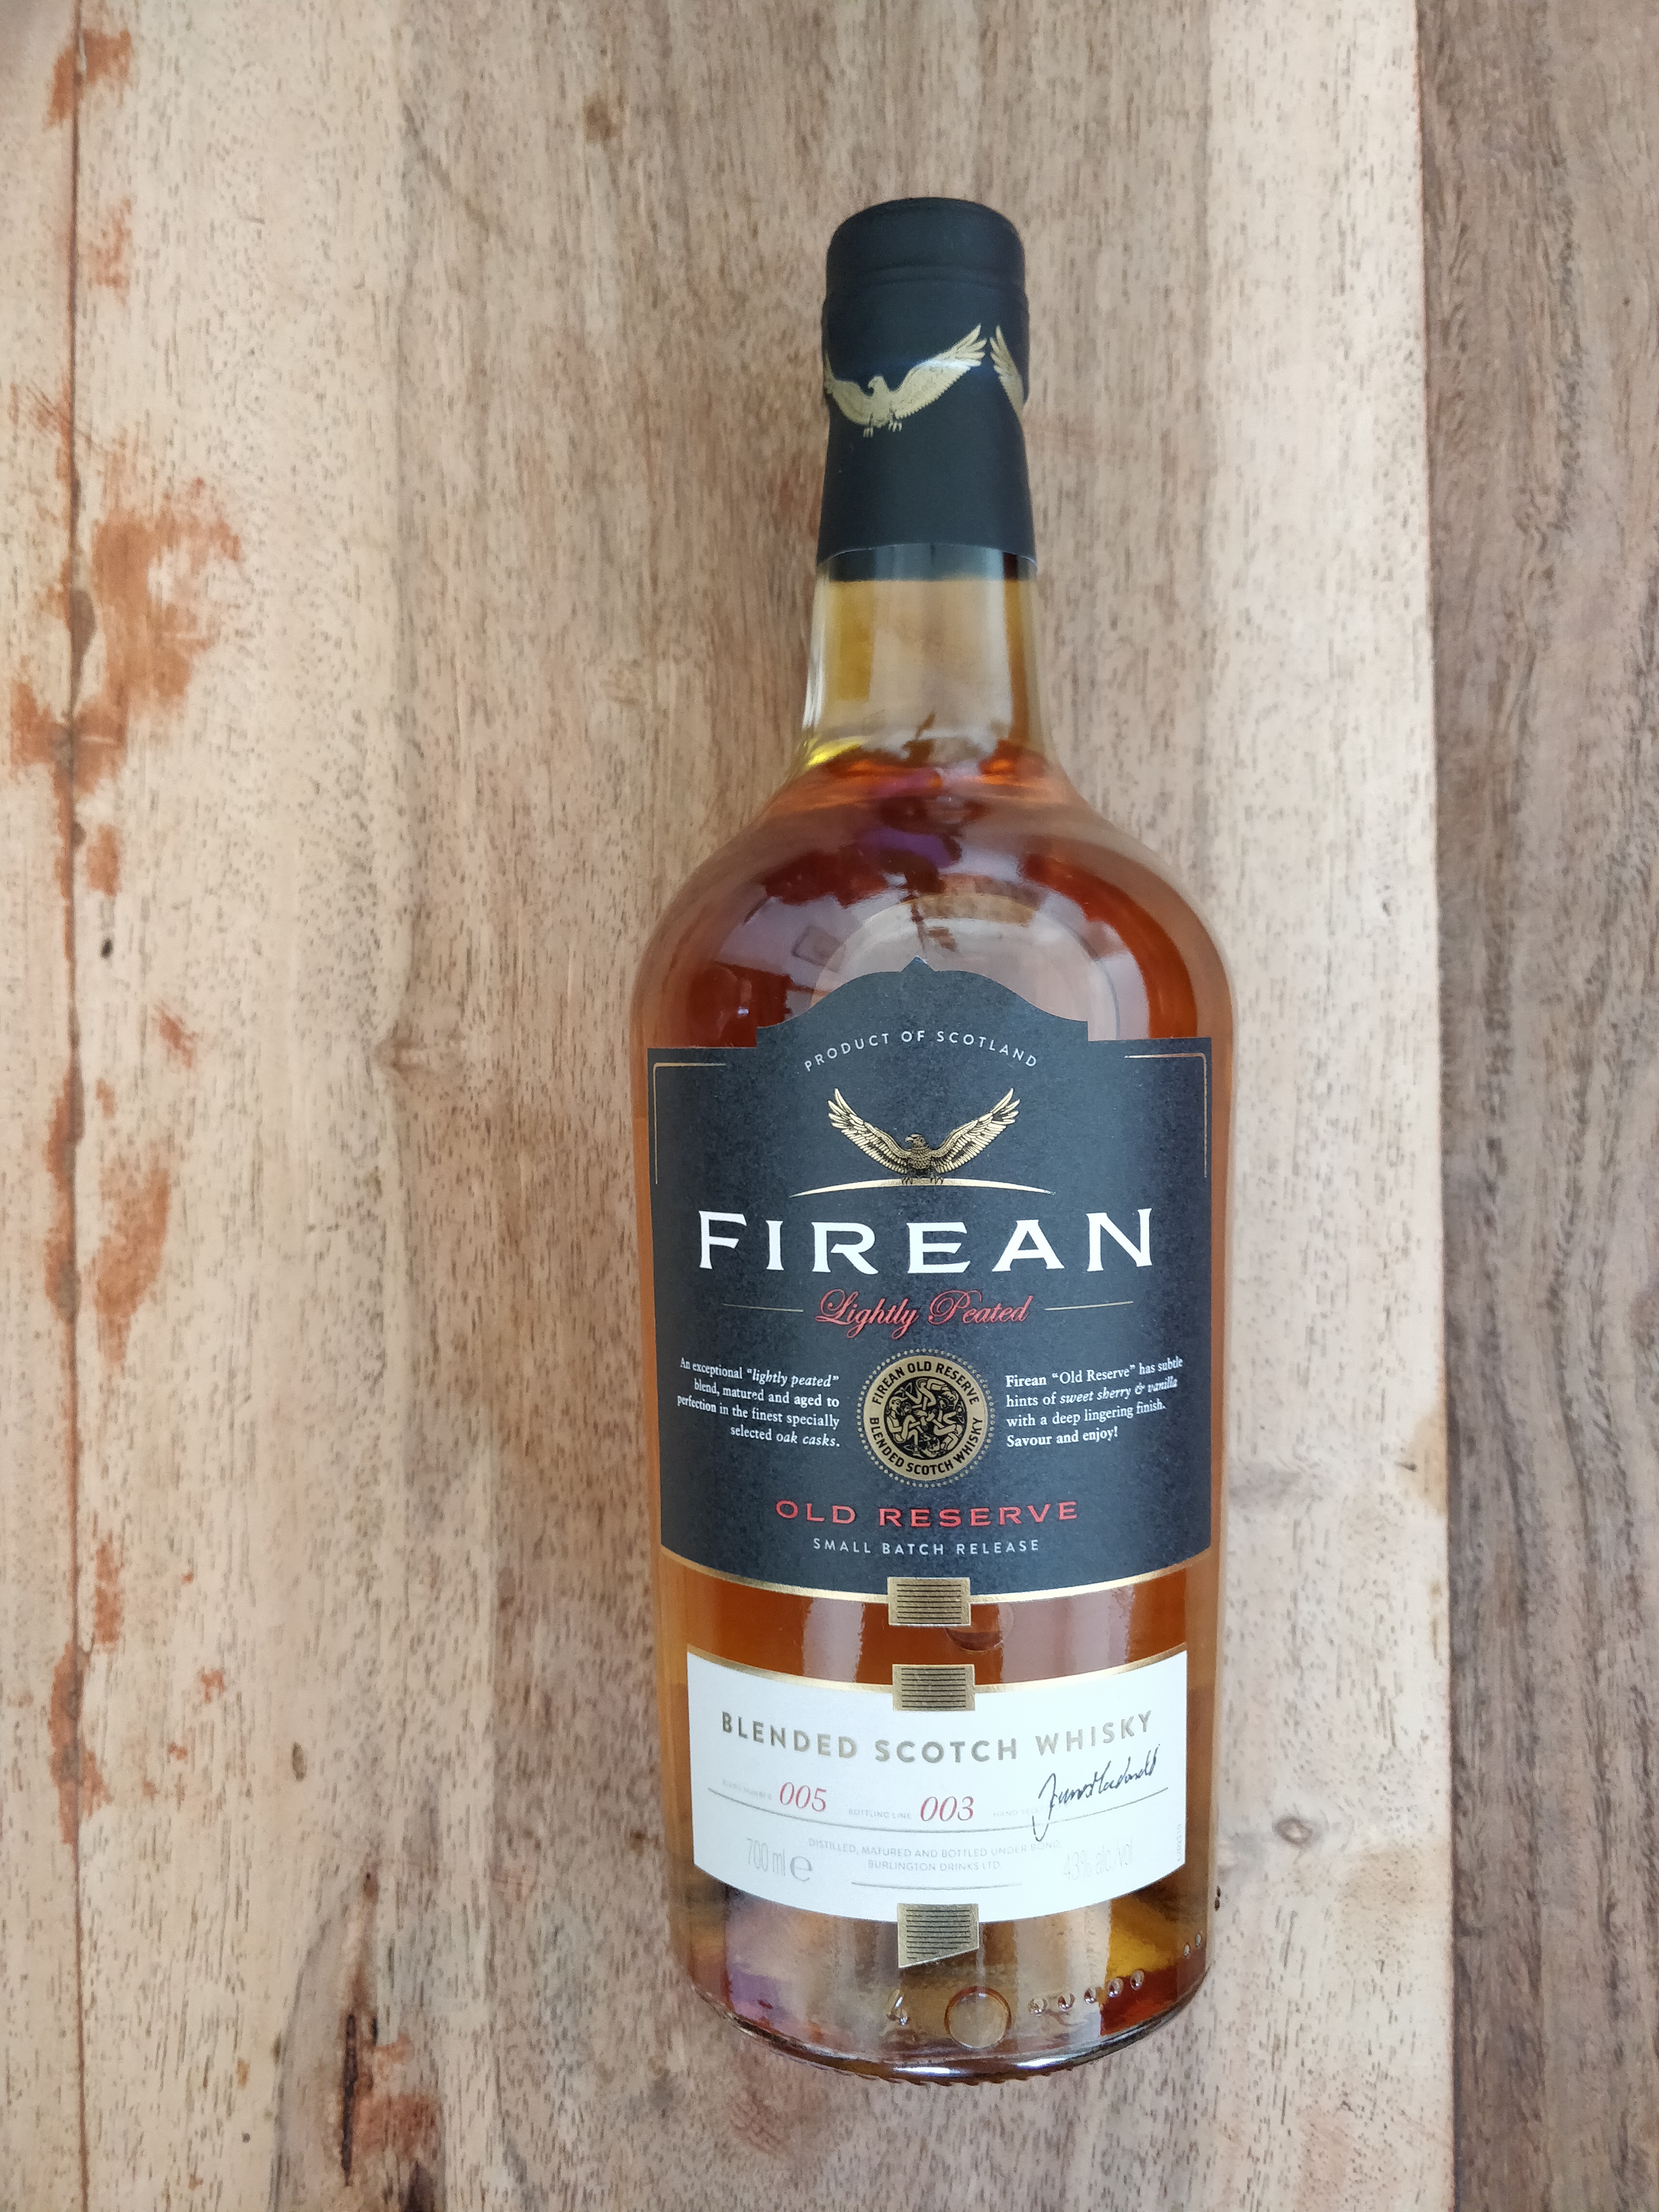 Firean blended scotch whisky